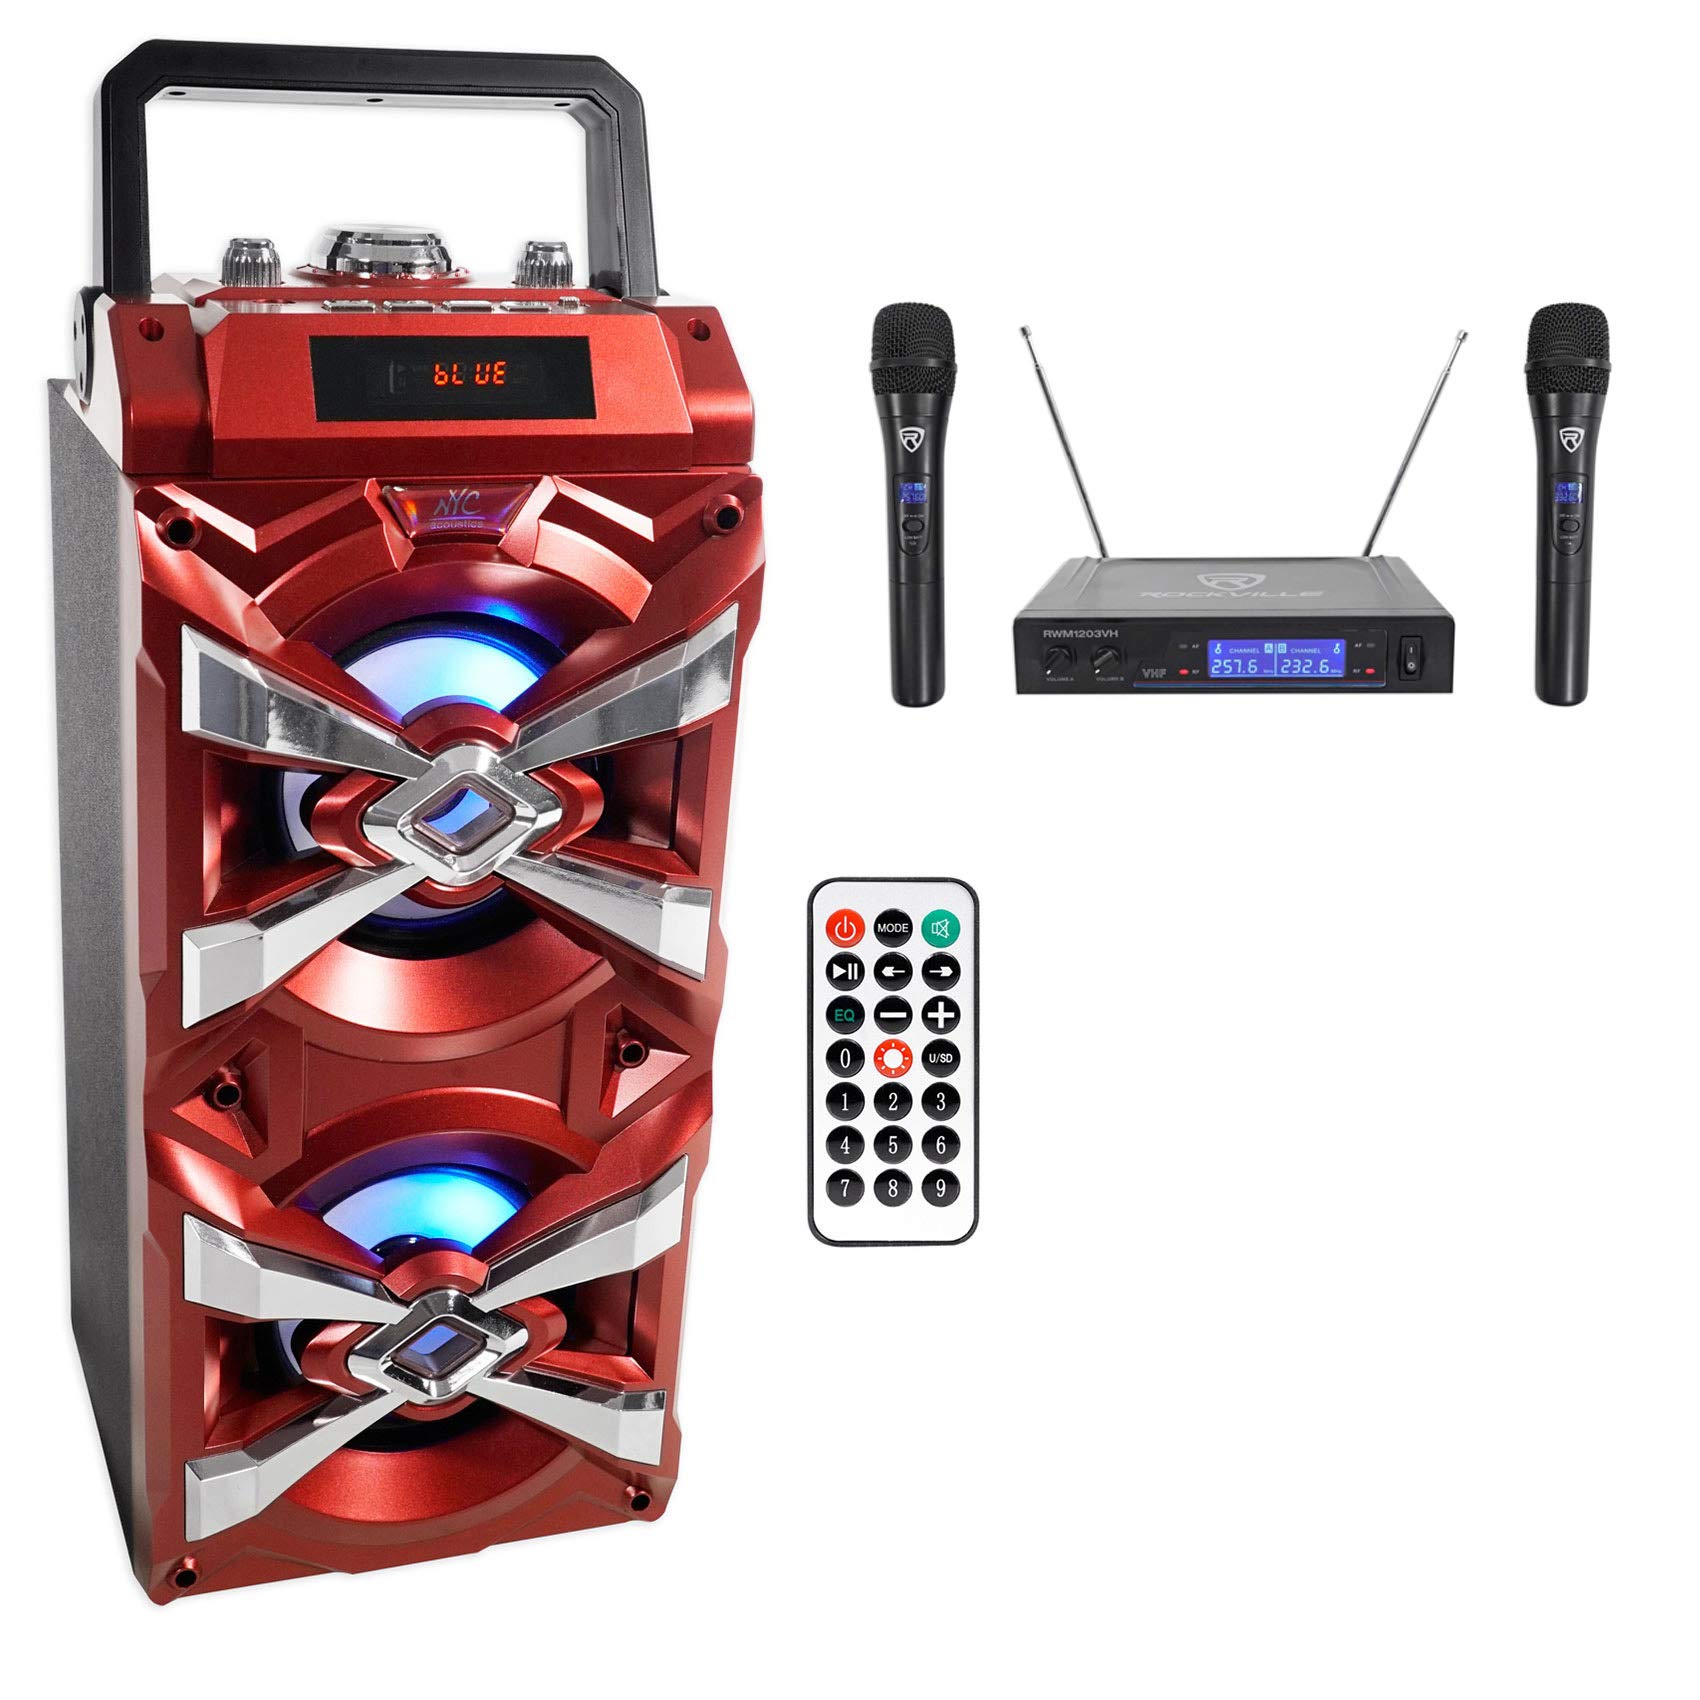 NYC Acoustics X-Tower Dual 4" Bluetooth Speaker w/Sound Activated LED's+Remote Bundle with Rockville RWM1203VH VHF Wireless Dual Handheld Microphone System/Digital Display